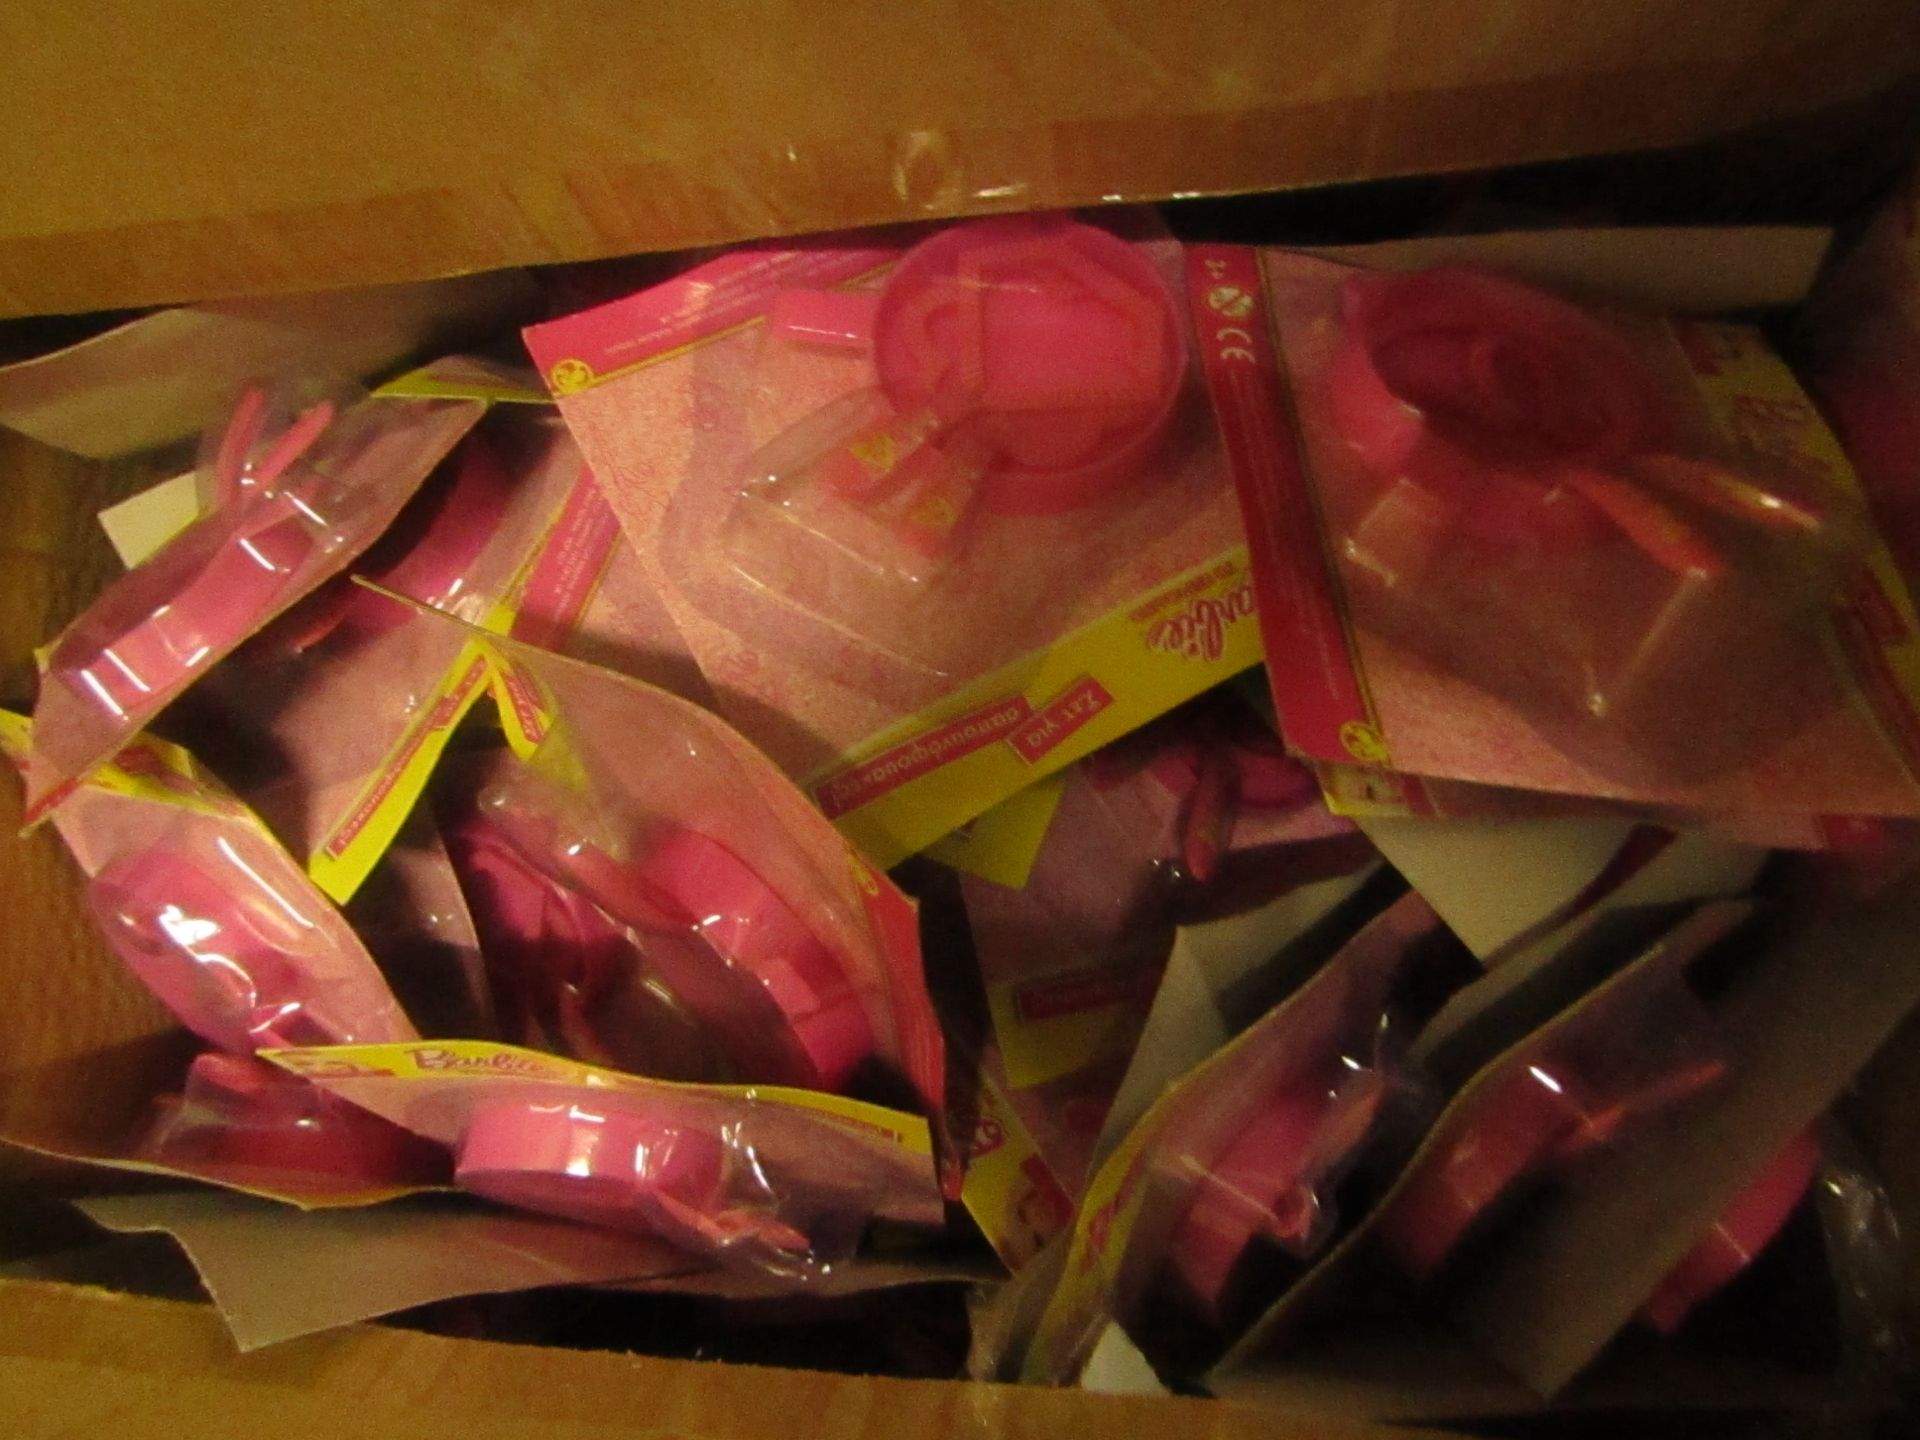 Approx 20 sets of Barbie Pan sets. Packaged